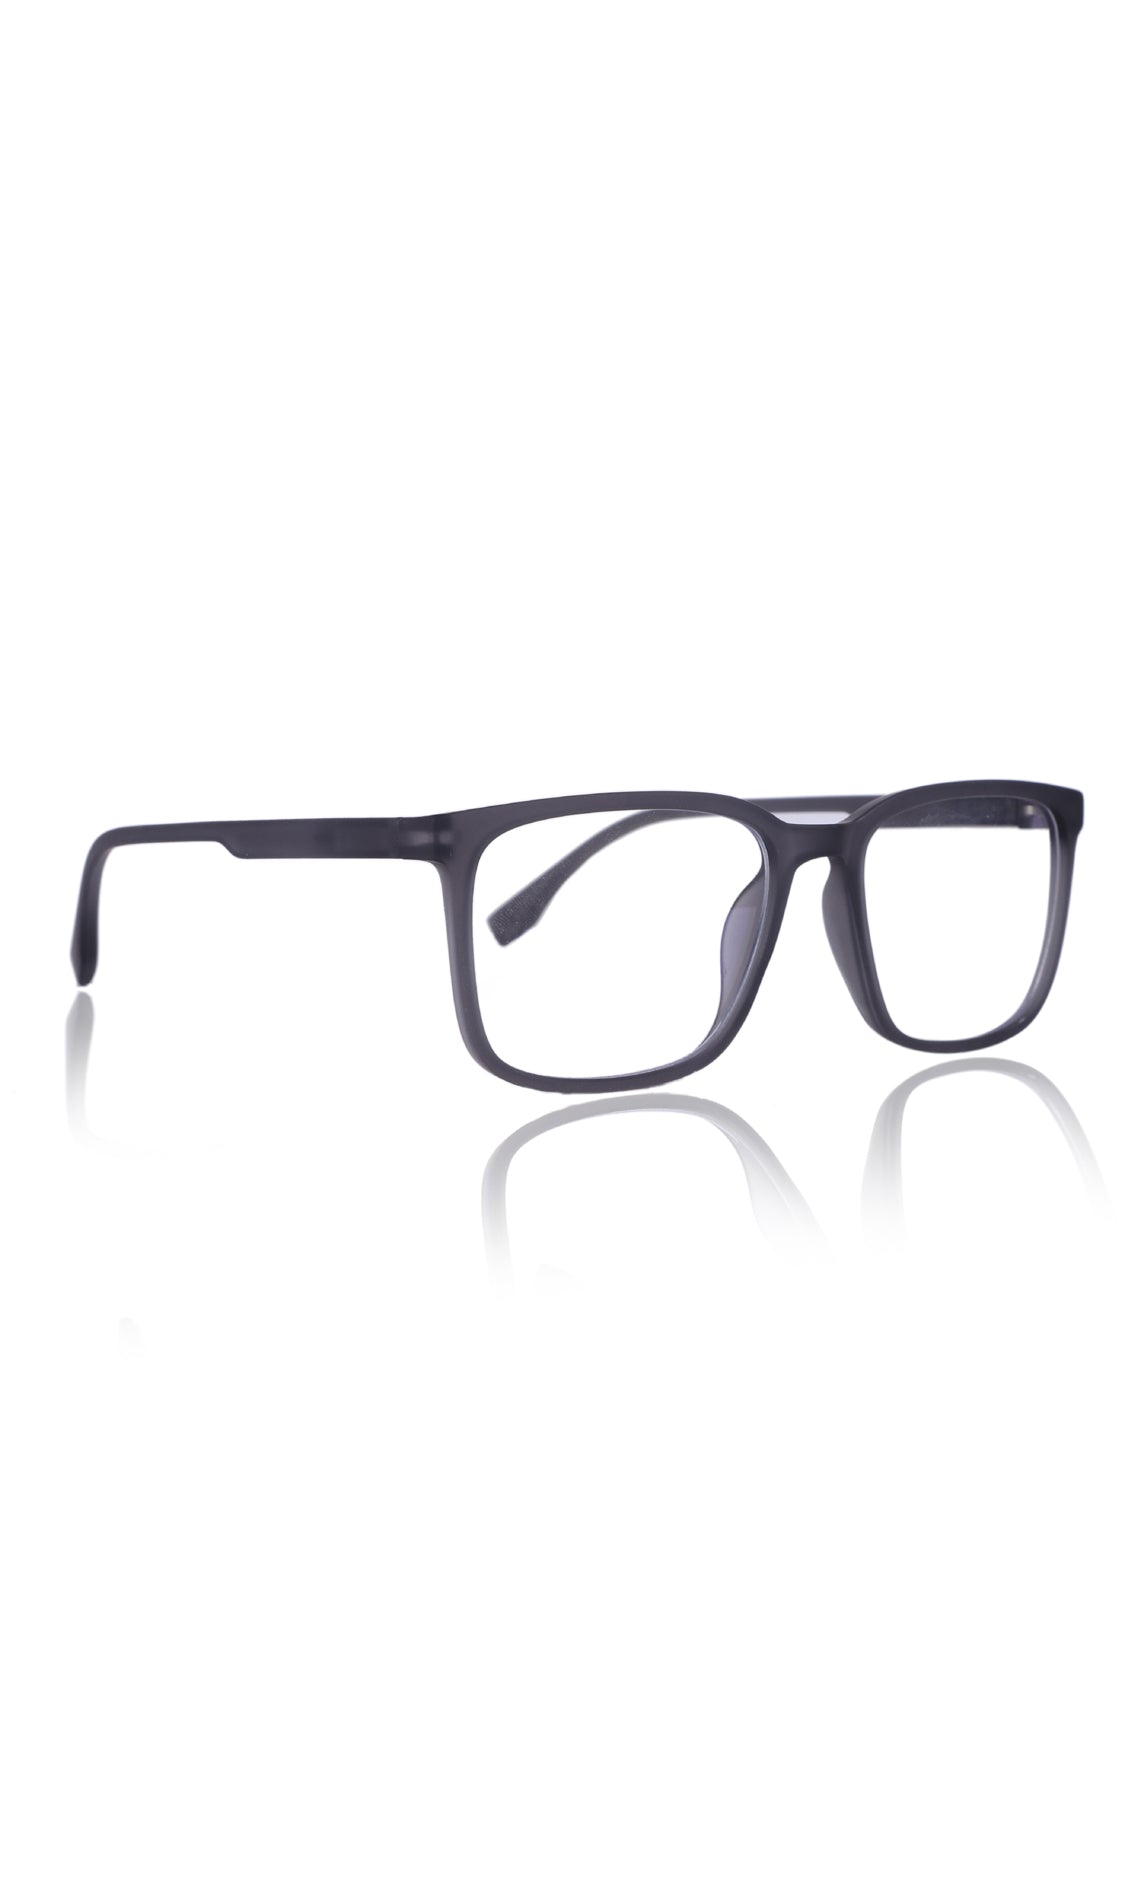 Jodykoes® Colour Series : Vibrant colours eyewear rectangle frames with anti glare and blue filter eyeglasses for men and women (Opaque Black)